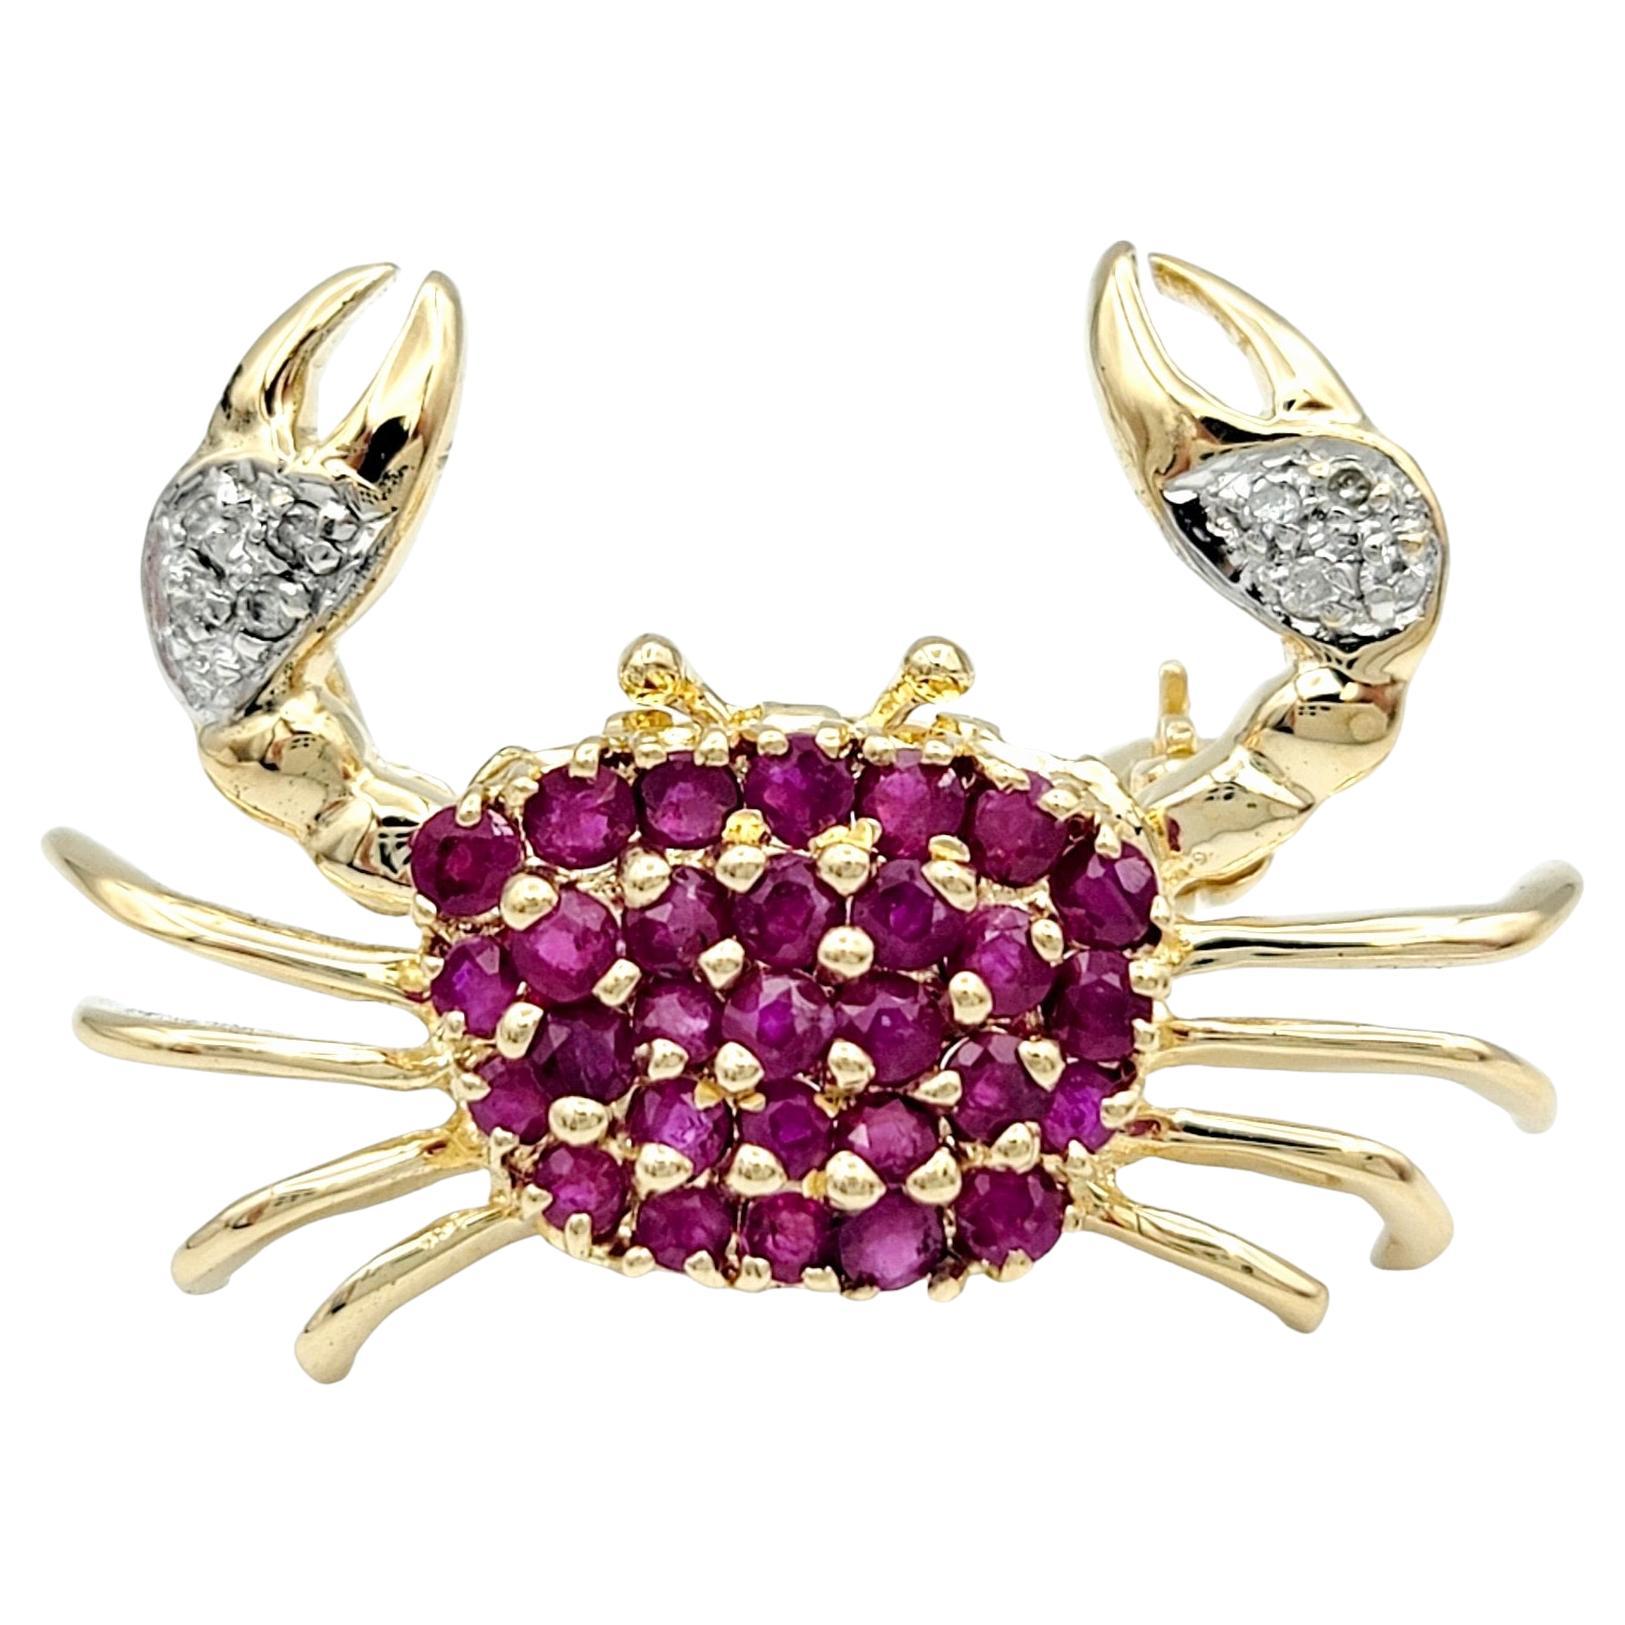 Ruby and Diamond Small Crab Design Brooch / Pendant Set in 14 Karat Yellow Gold